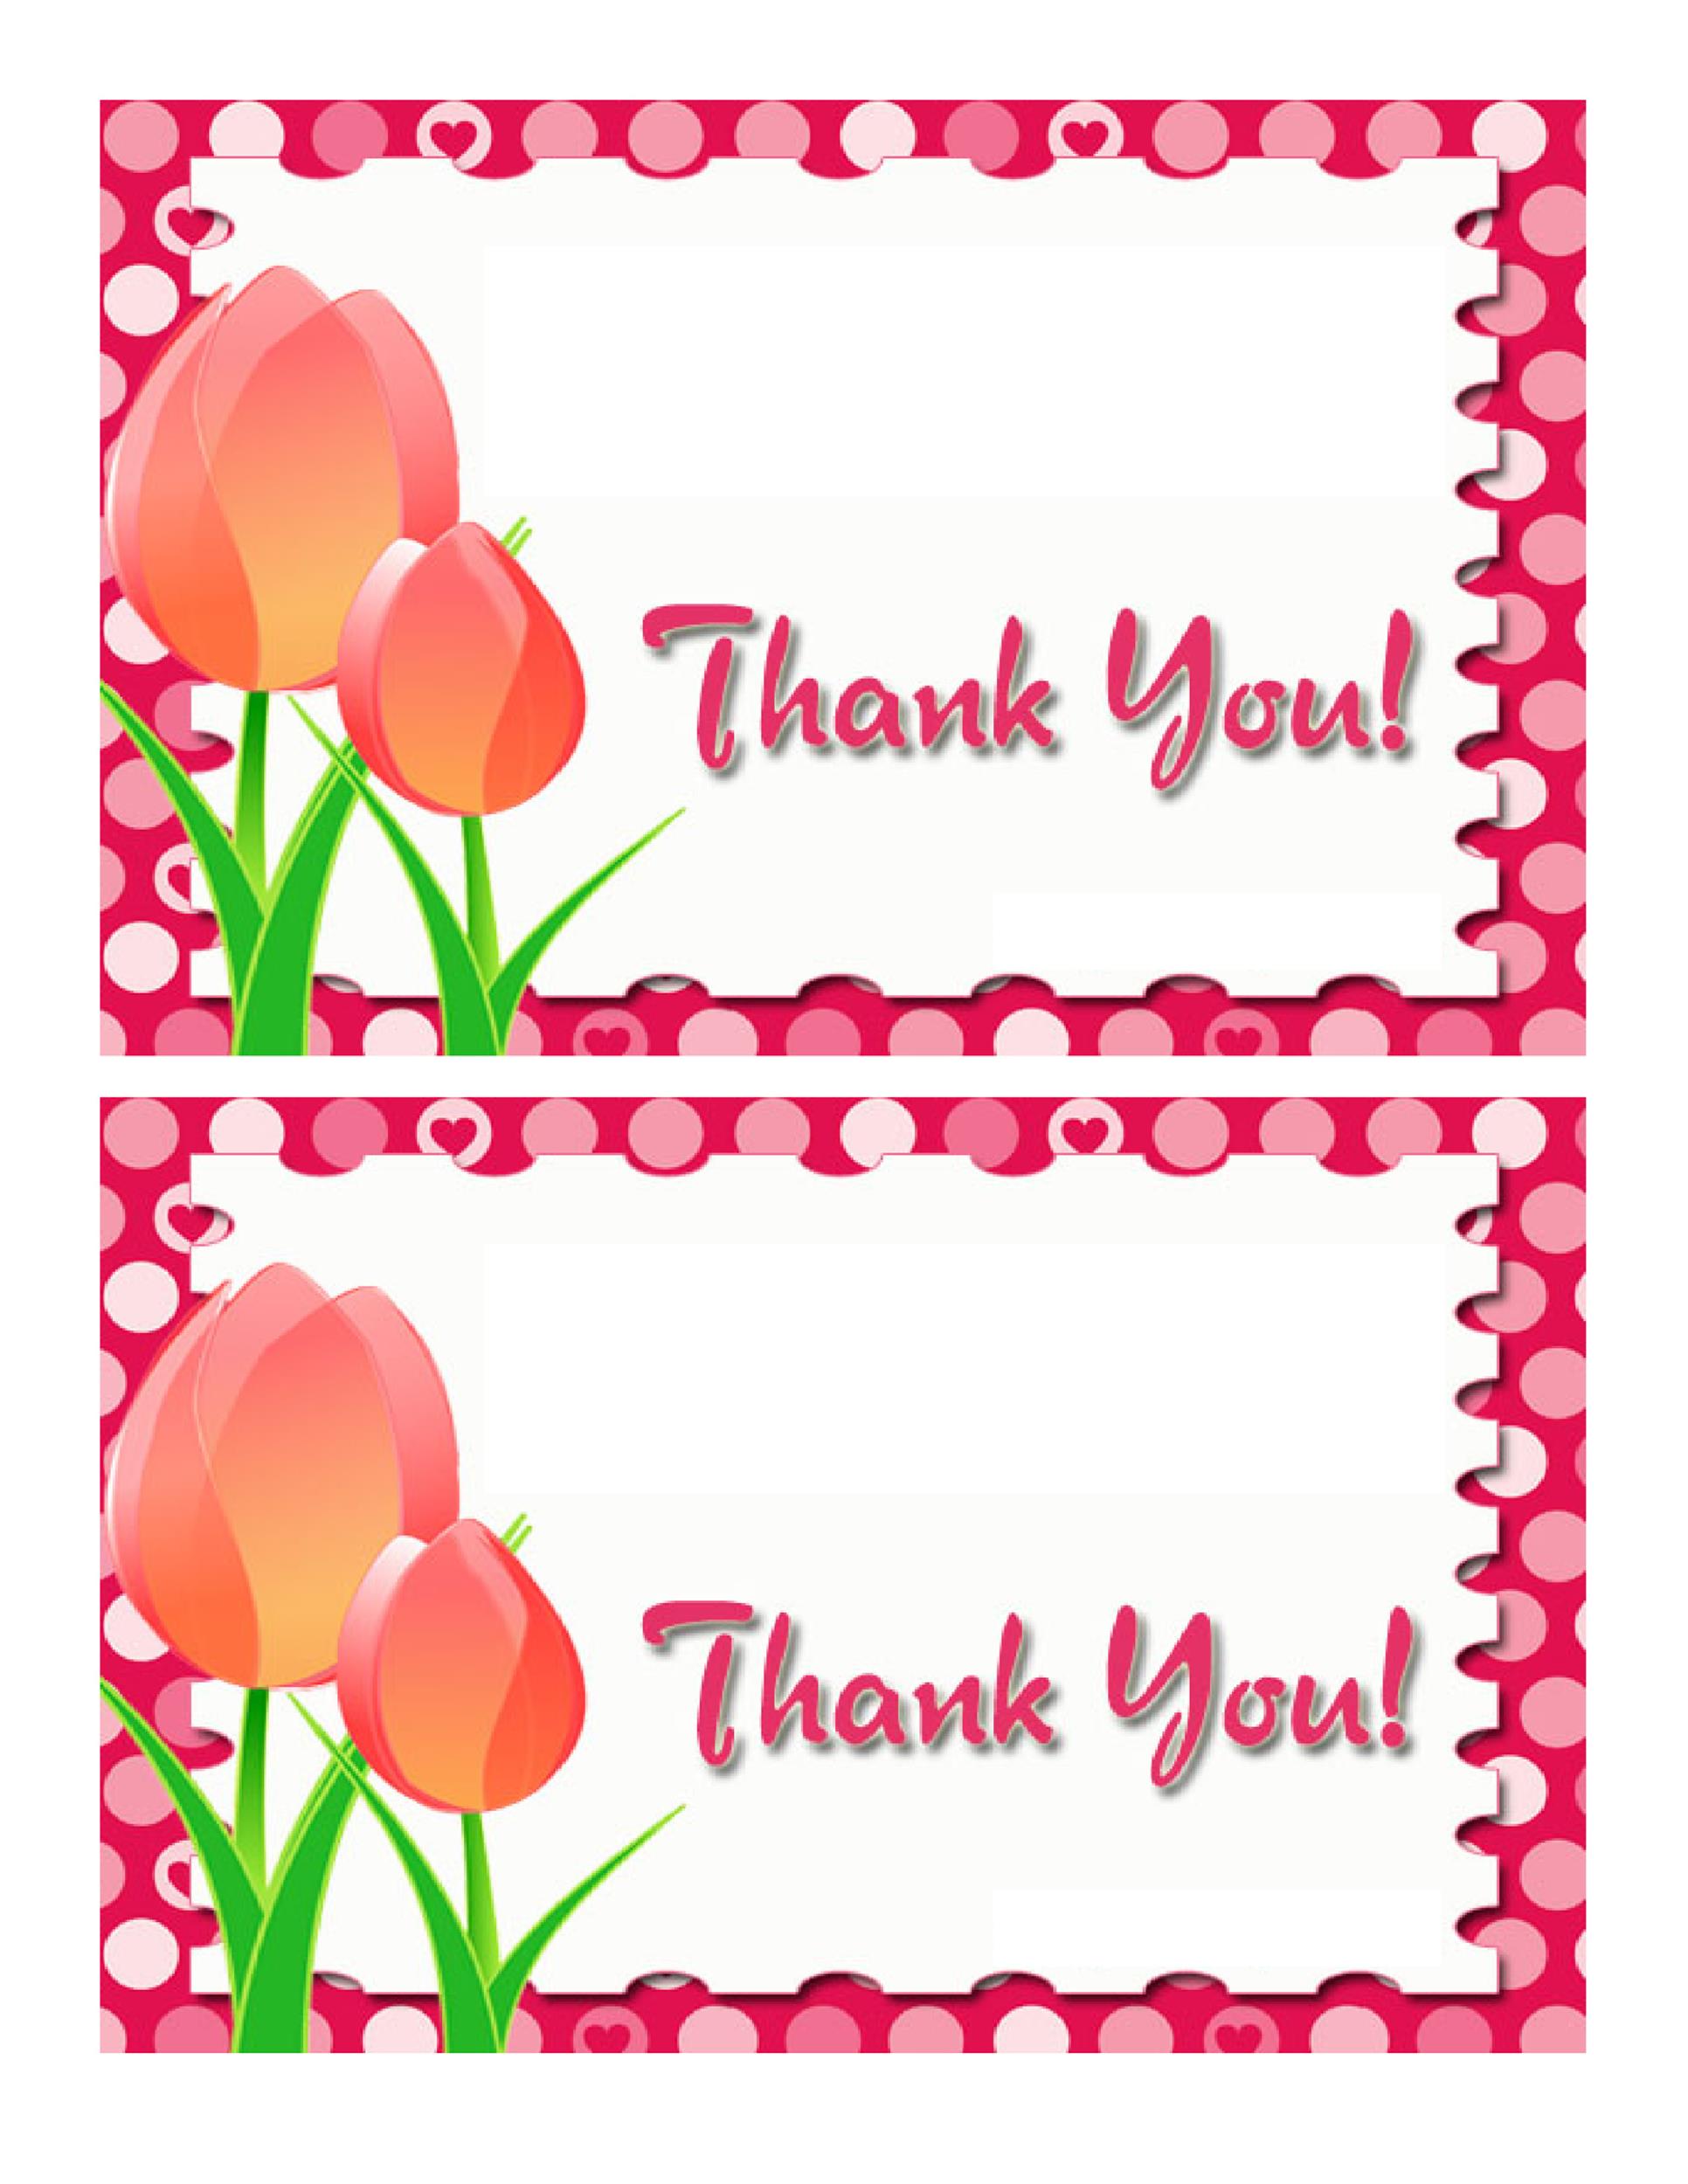 Thank You Card Templates 11  Free Word Excel PDF Formats Samples